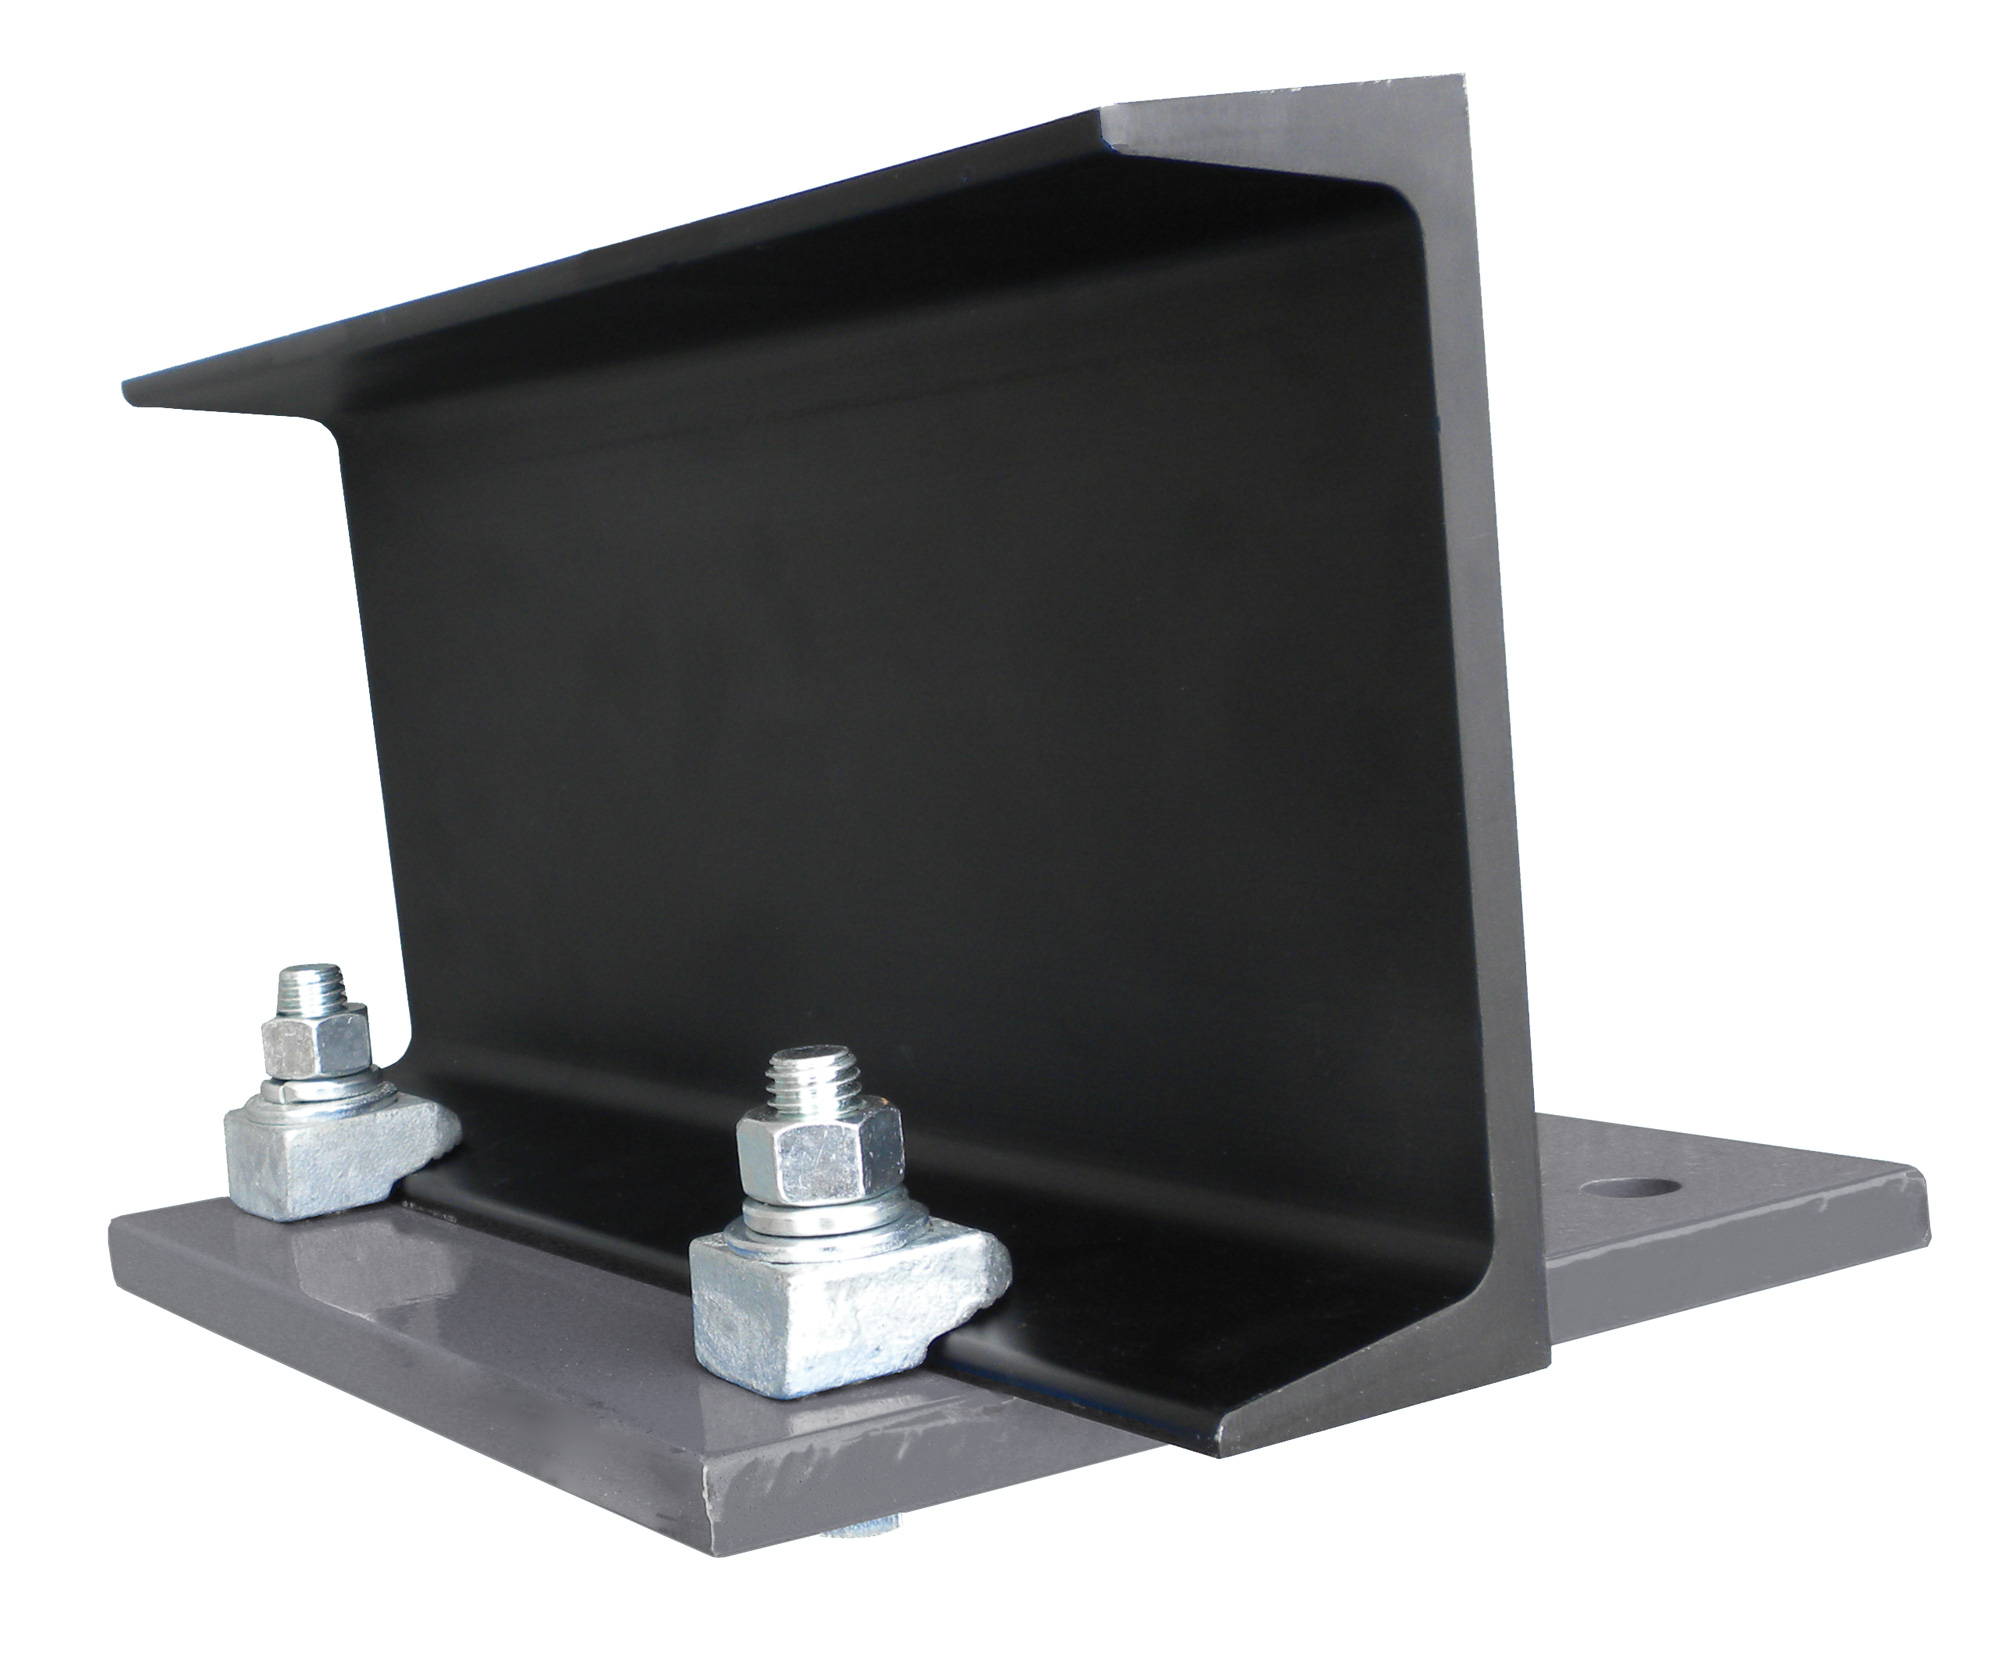 BeamClamp assembly typically consists of BeamClamps, hardware, and/or location plates.